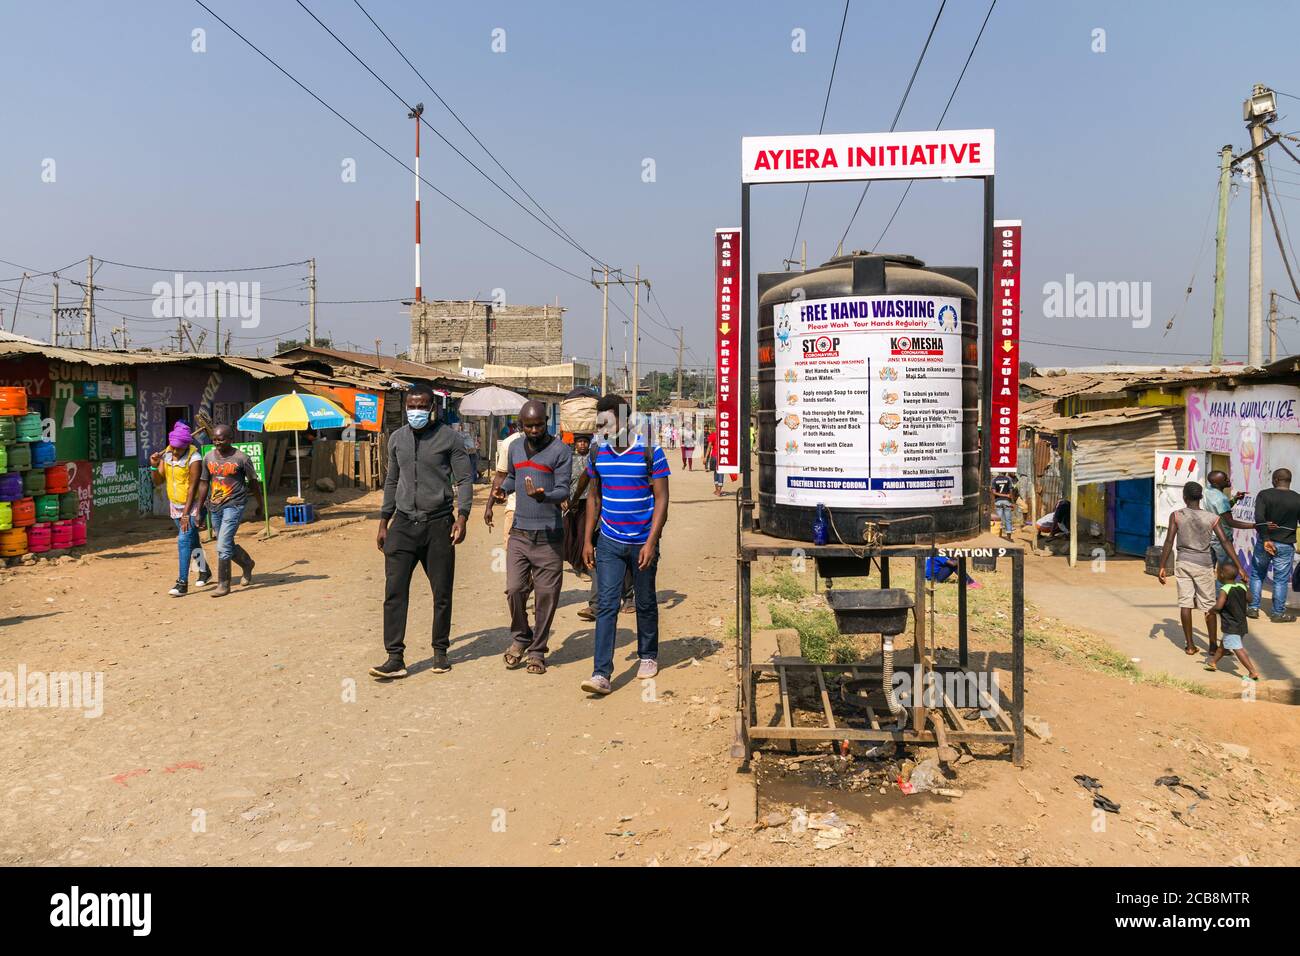 A large plastic water tank with free hand washing sign on it to fight coronavirus by the side of a dirt road, Nairobi, Kenya Stock Photo